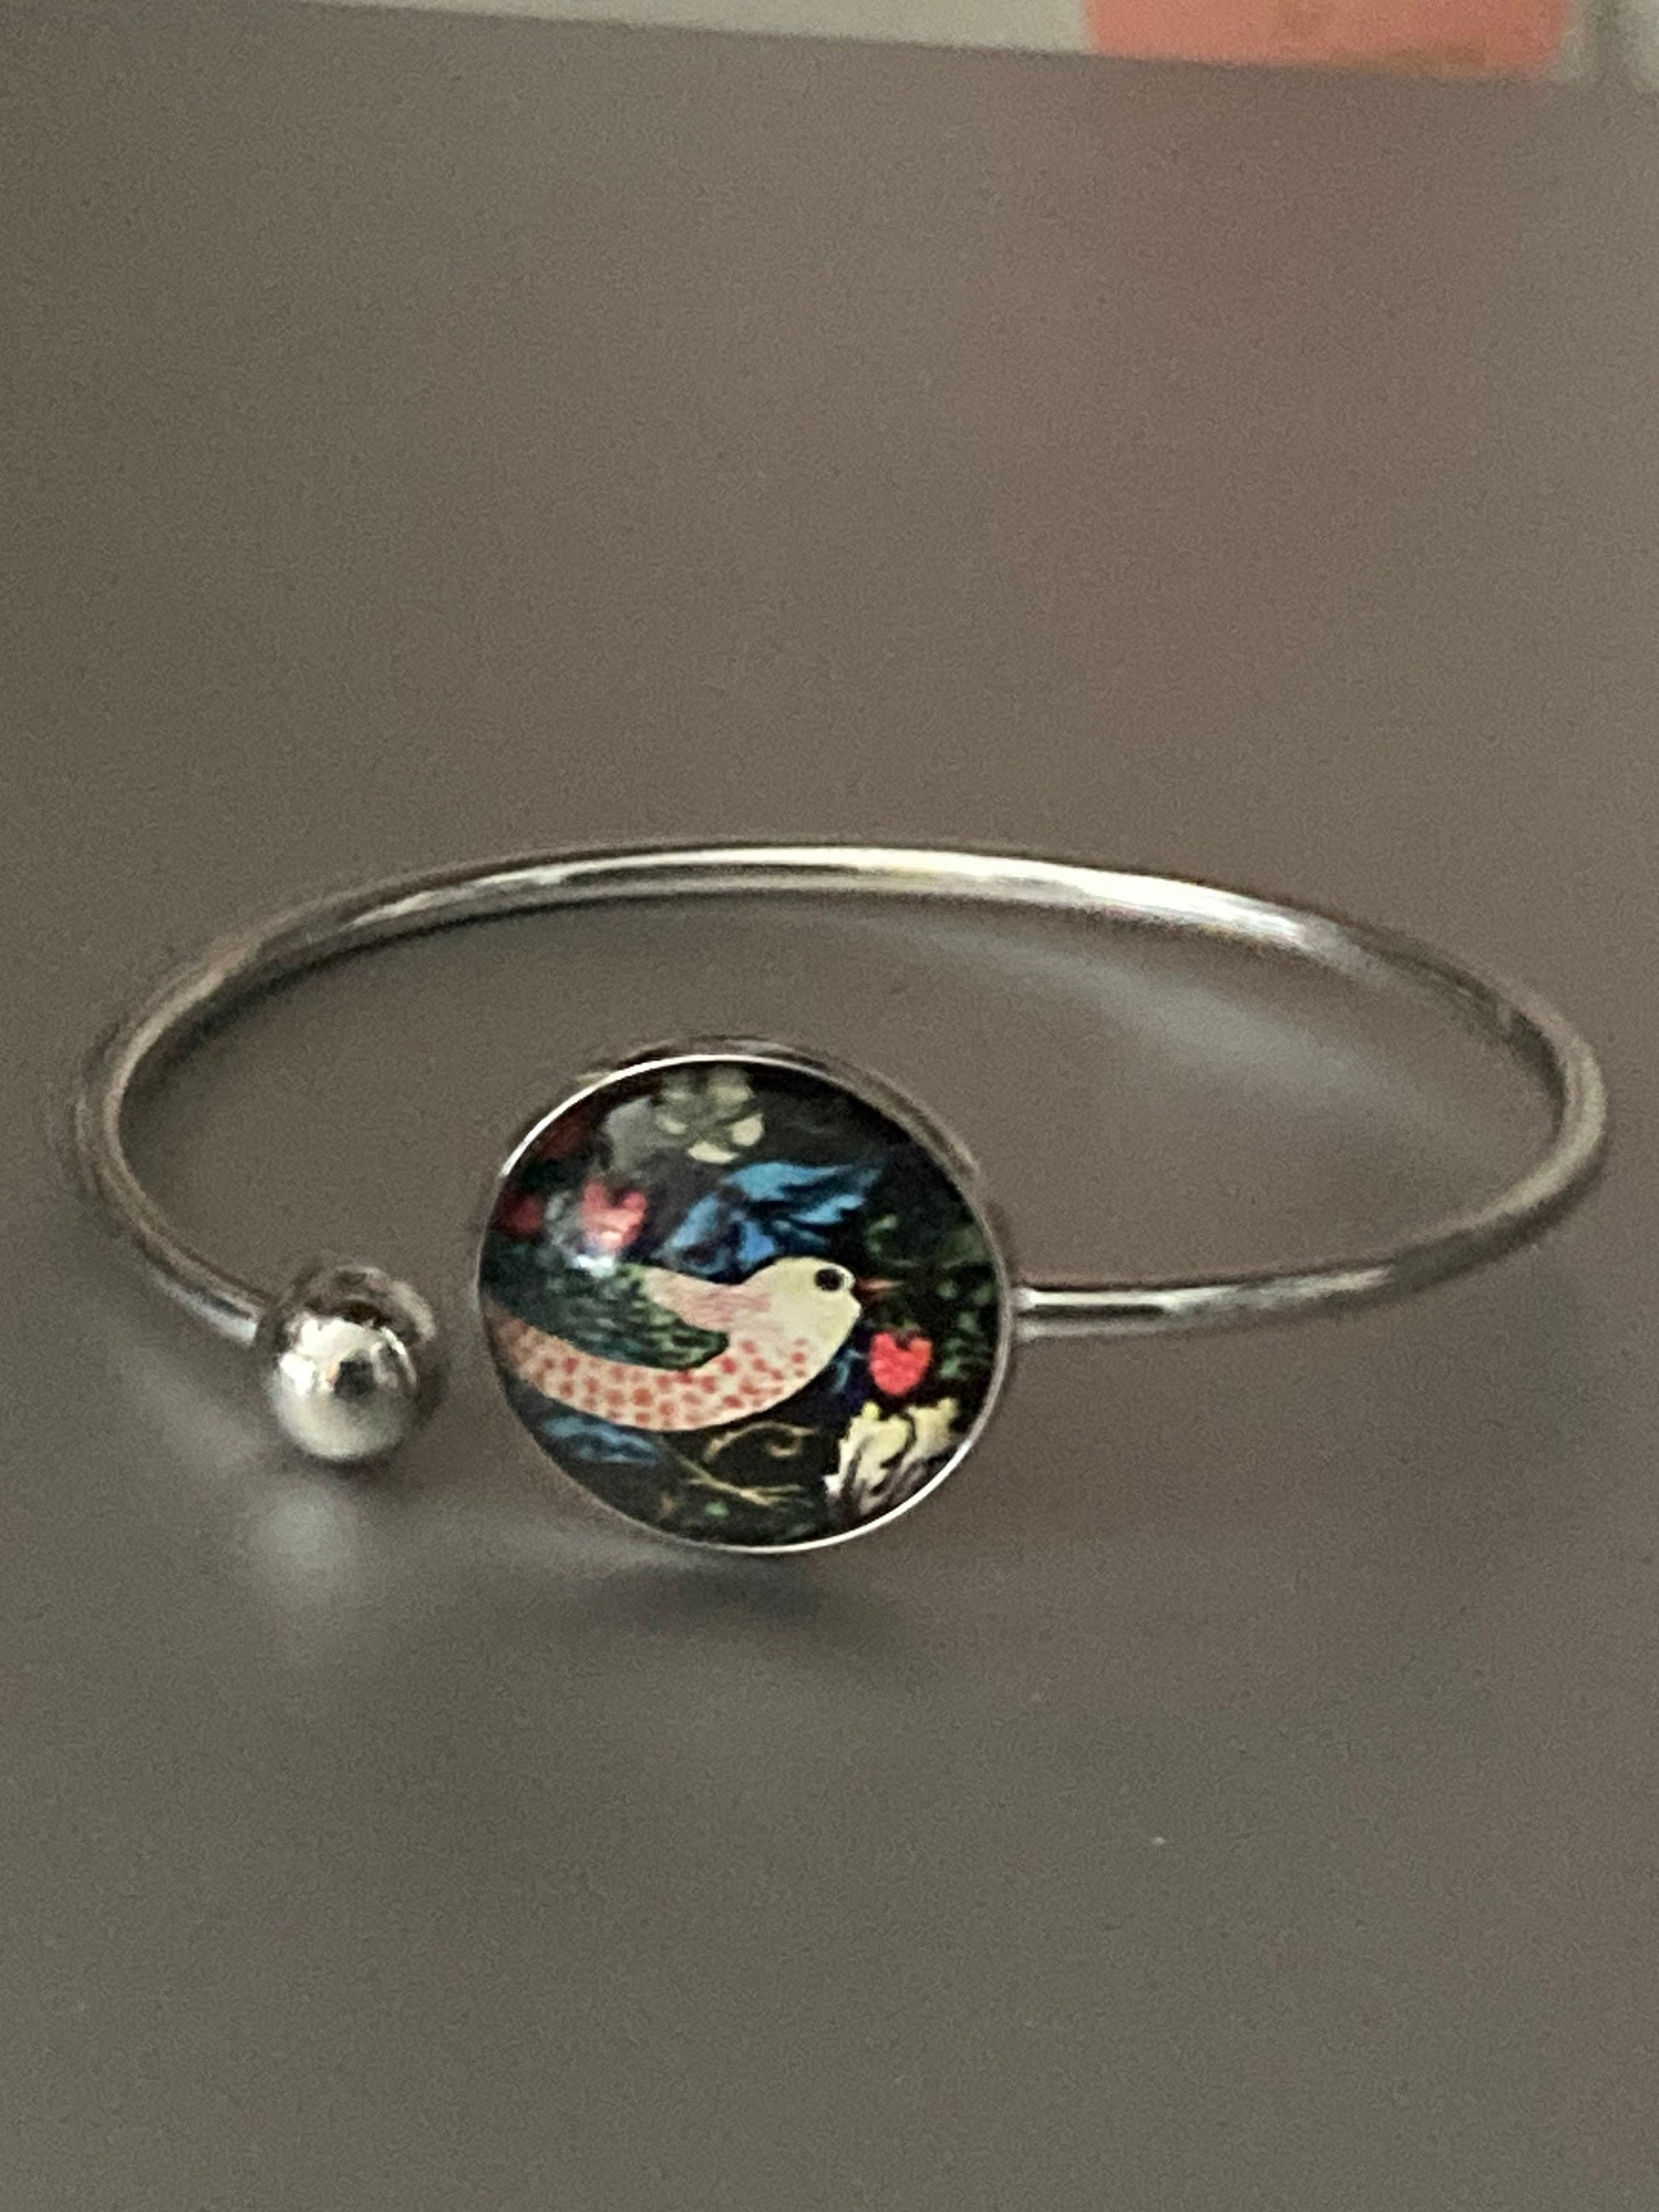 William morris the strawberry thief stainless steel glass cabochon bangle bracelet